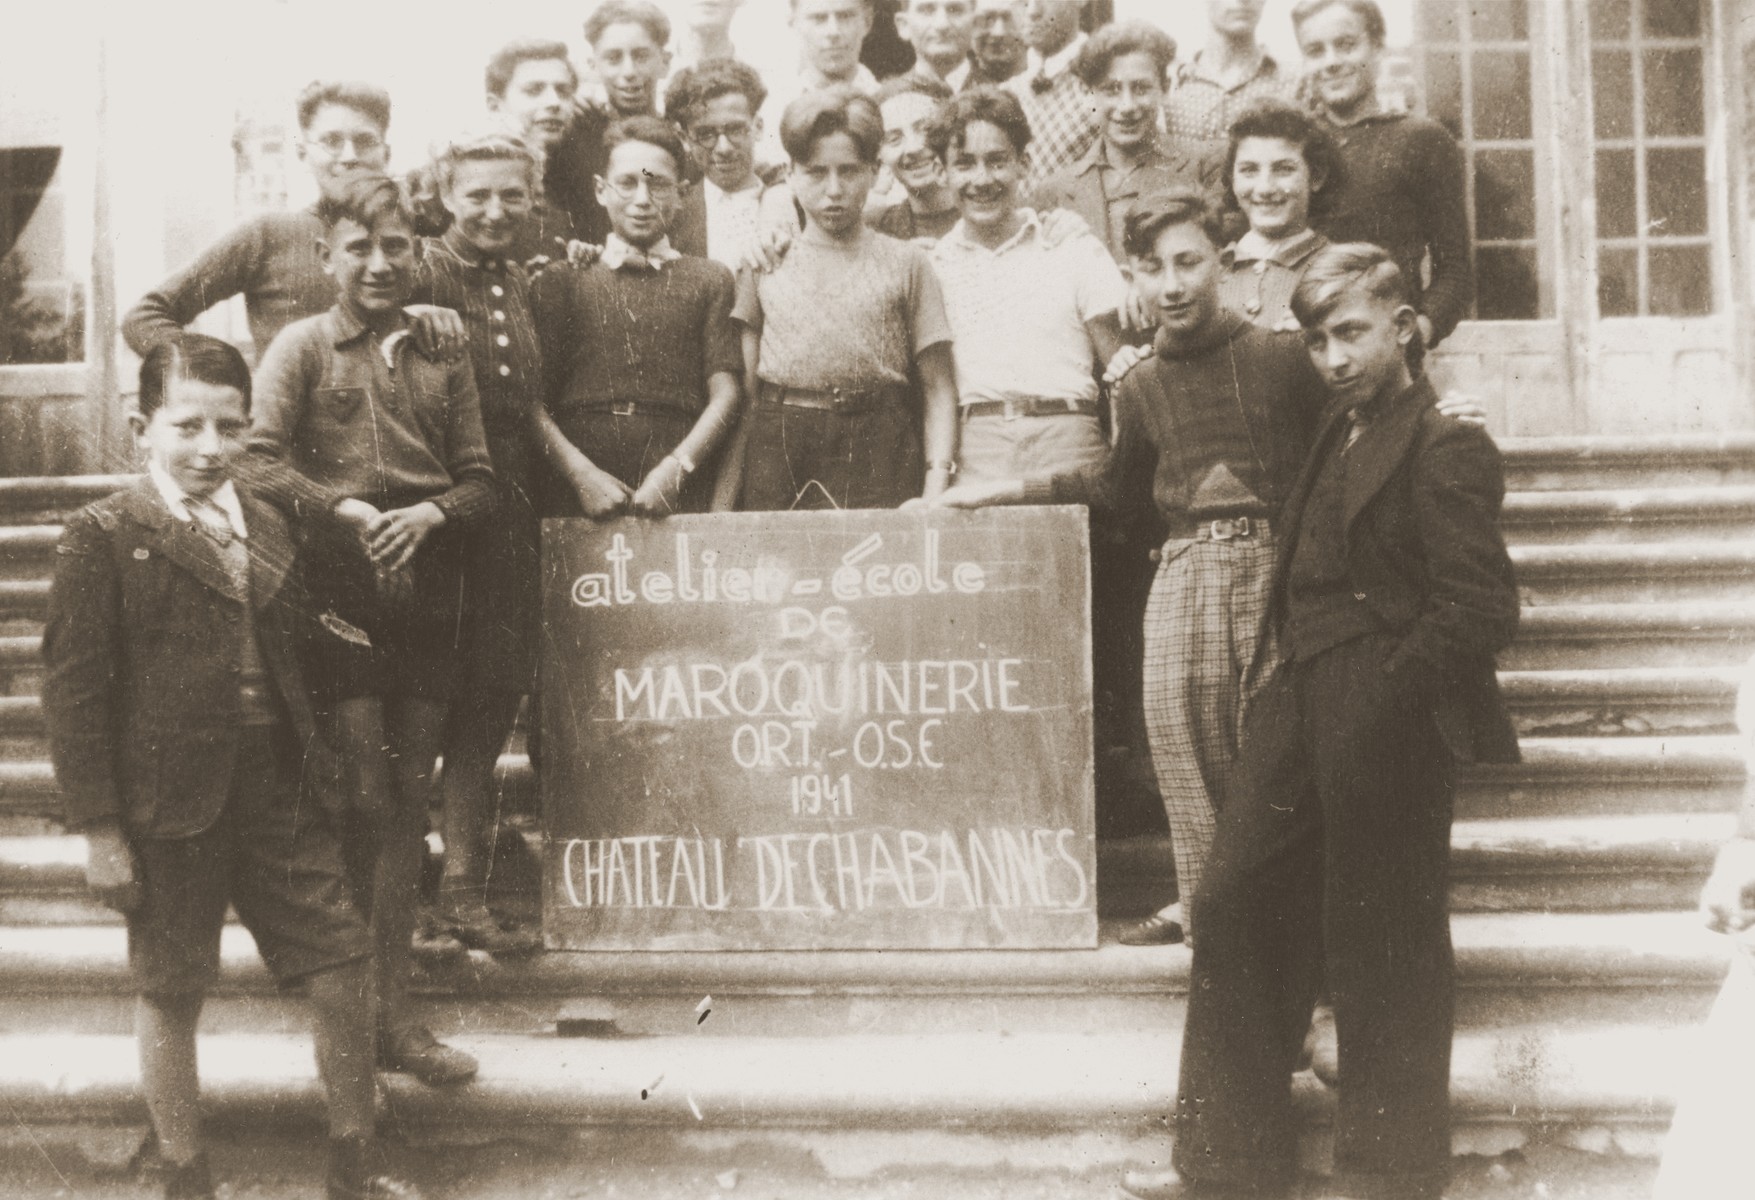 Jewish refugee youth who are students in an ORT leather working class at the Château de Chabannes children's home, pose on the front staircase of the home.  Château de Chabannes was sponsored by the OSE (Oeuvre de secours aux Enfants).  

Heinz Stephan Lewy is pictured in the front row, center.  Egon Halbright (born Halbreich) is located in the second row, wearing glasses and a white shirt--identified by his daughter, Rita Halbright